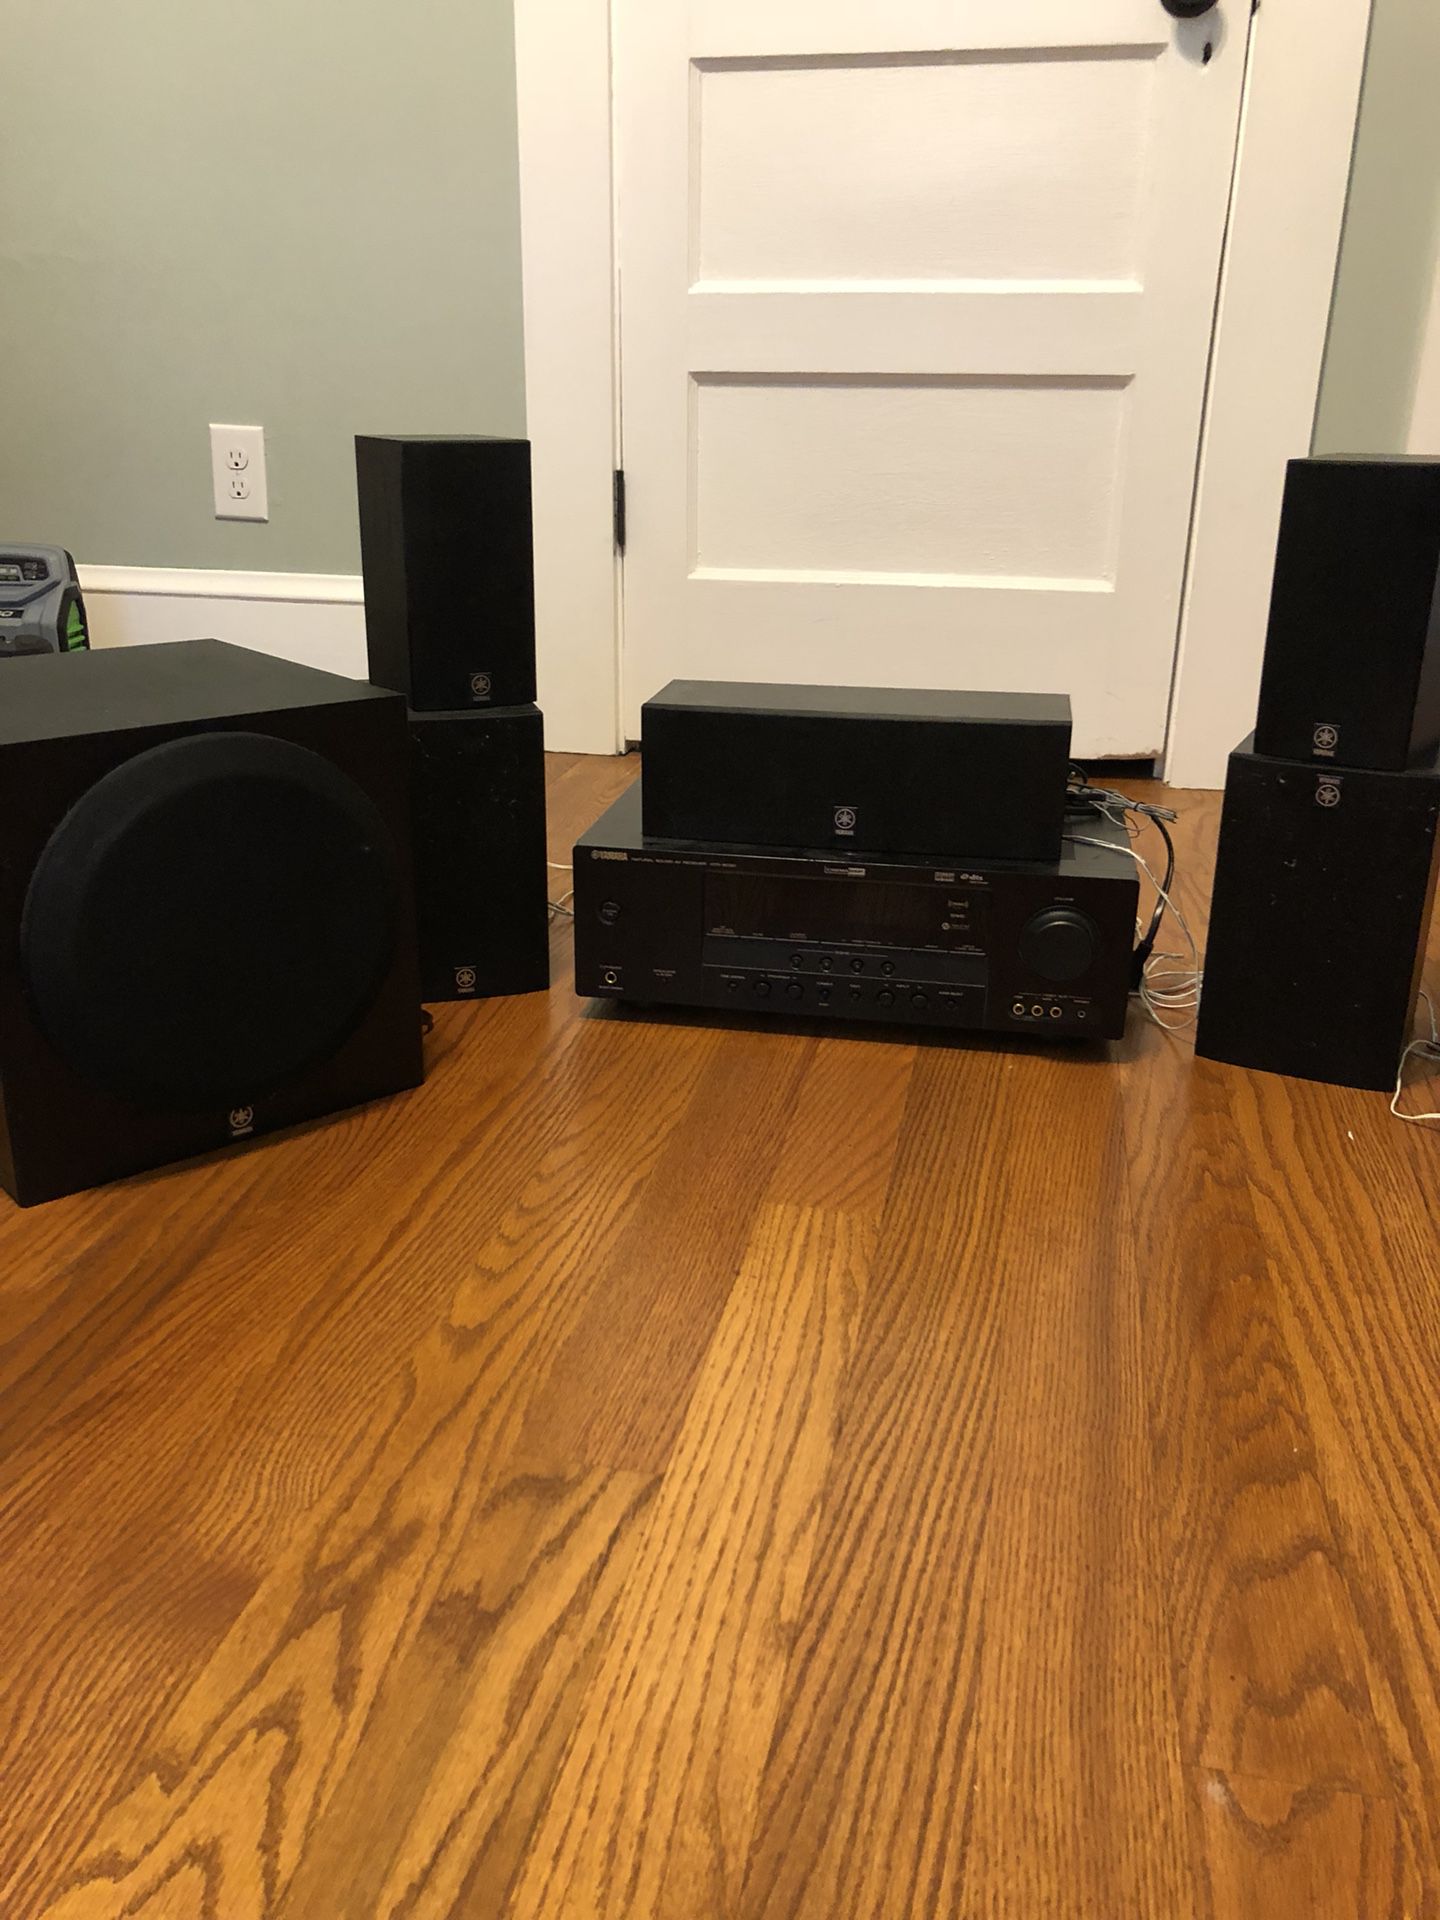 Home Theater System - Yamaha 6 speakers